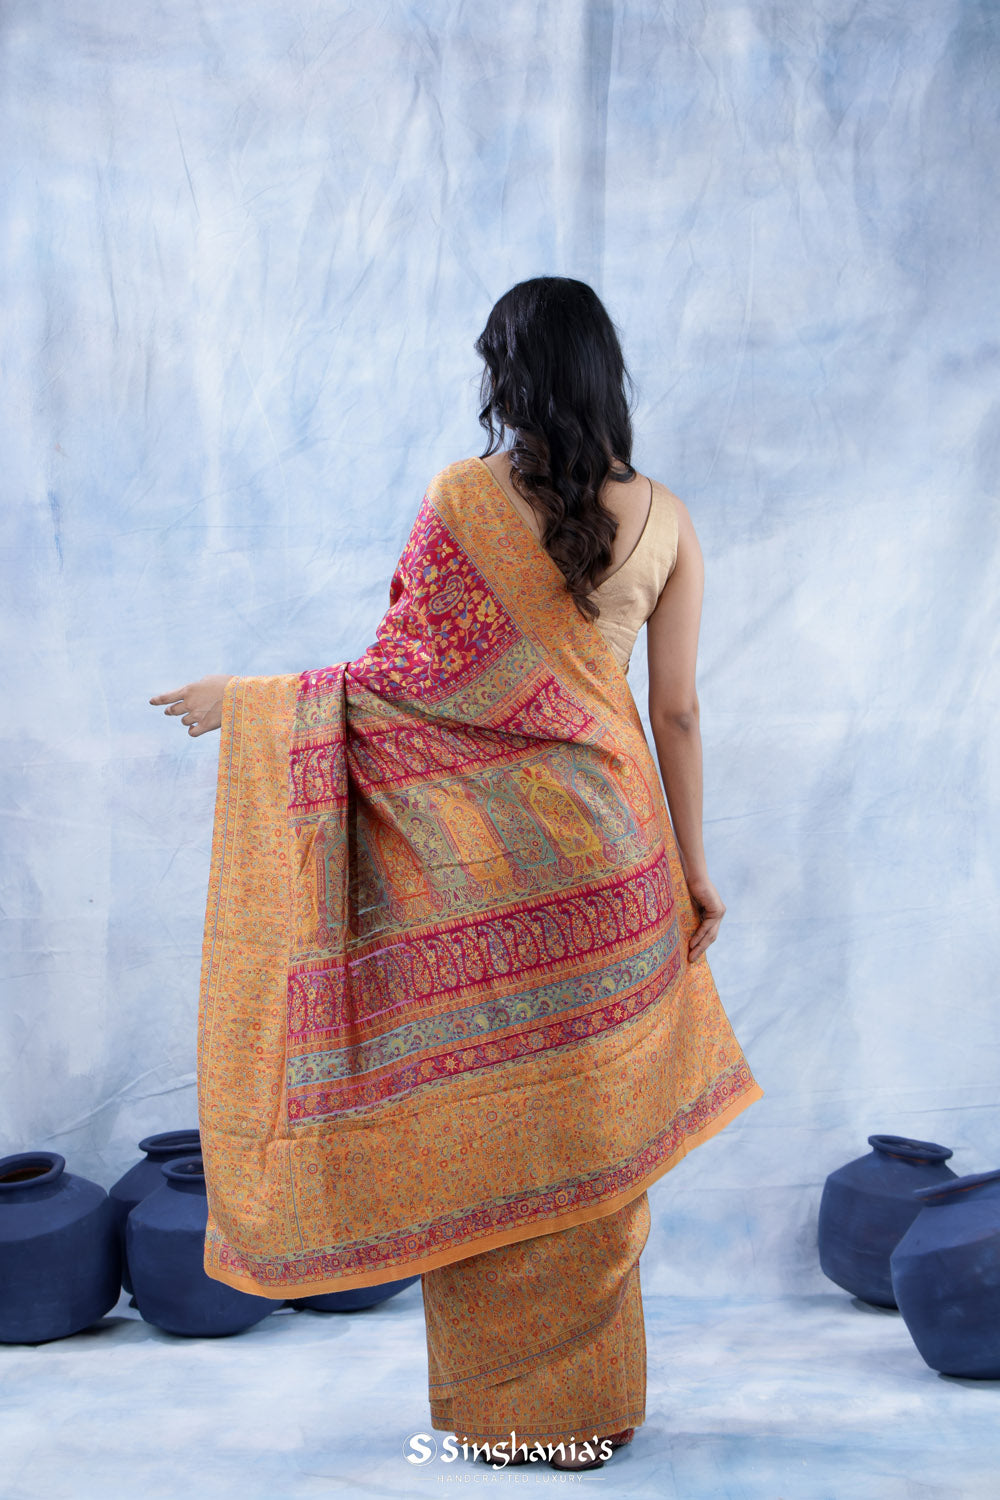 Hibiscus Red Kani Handloom Saree With Floral Jaal Design